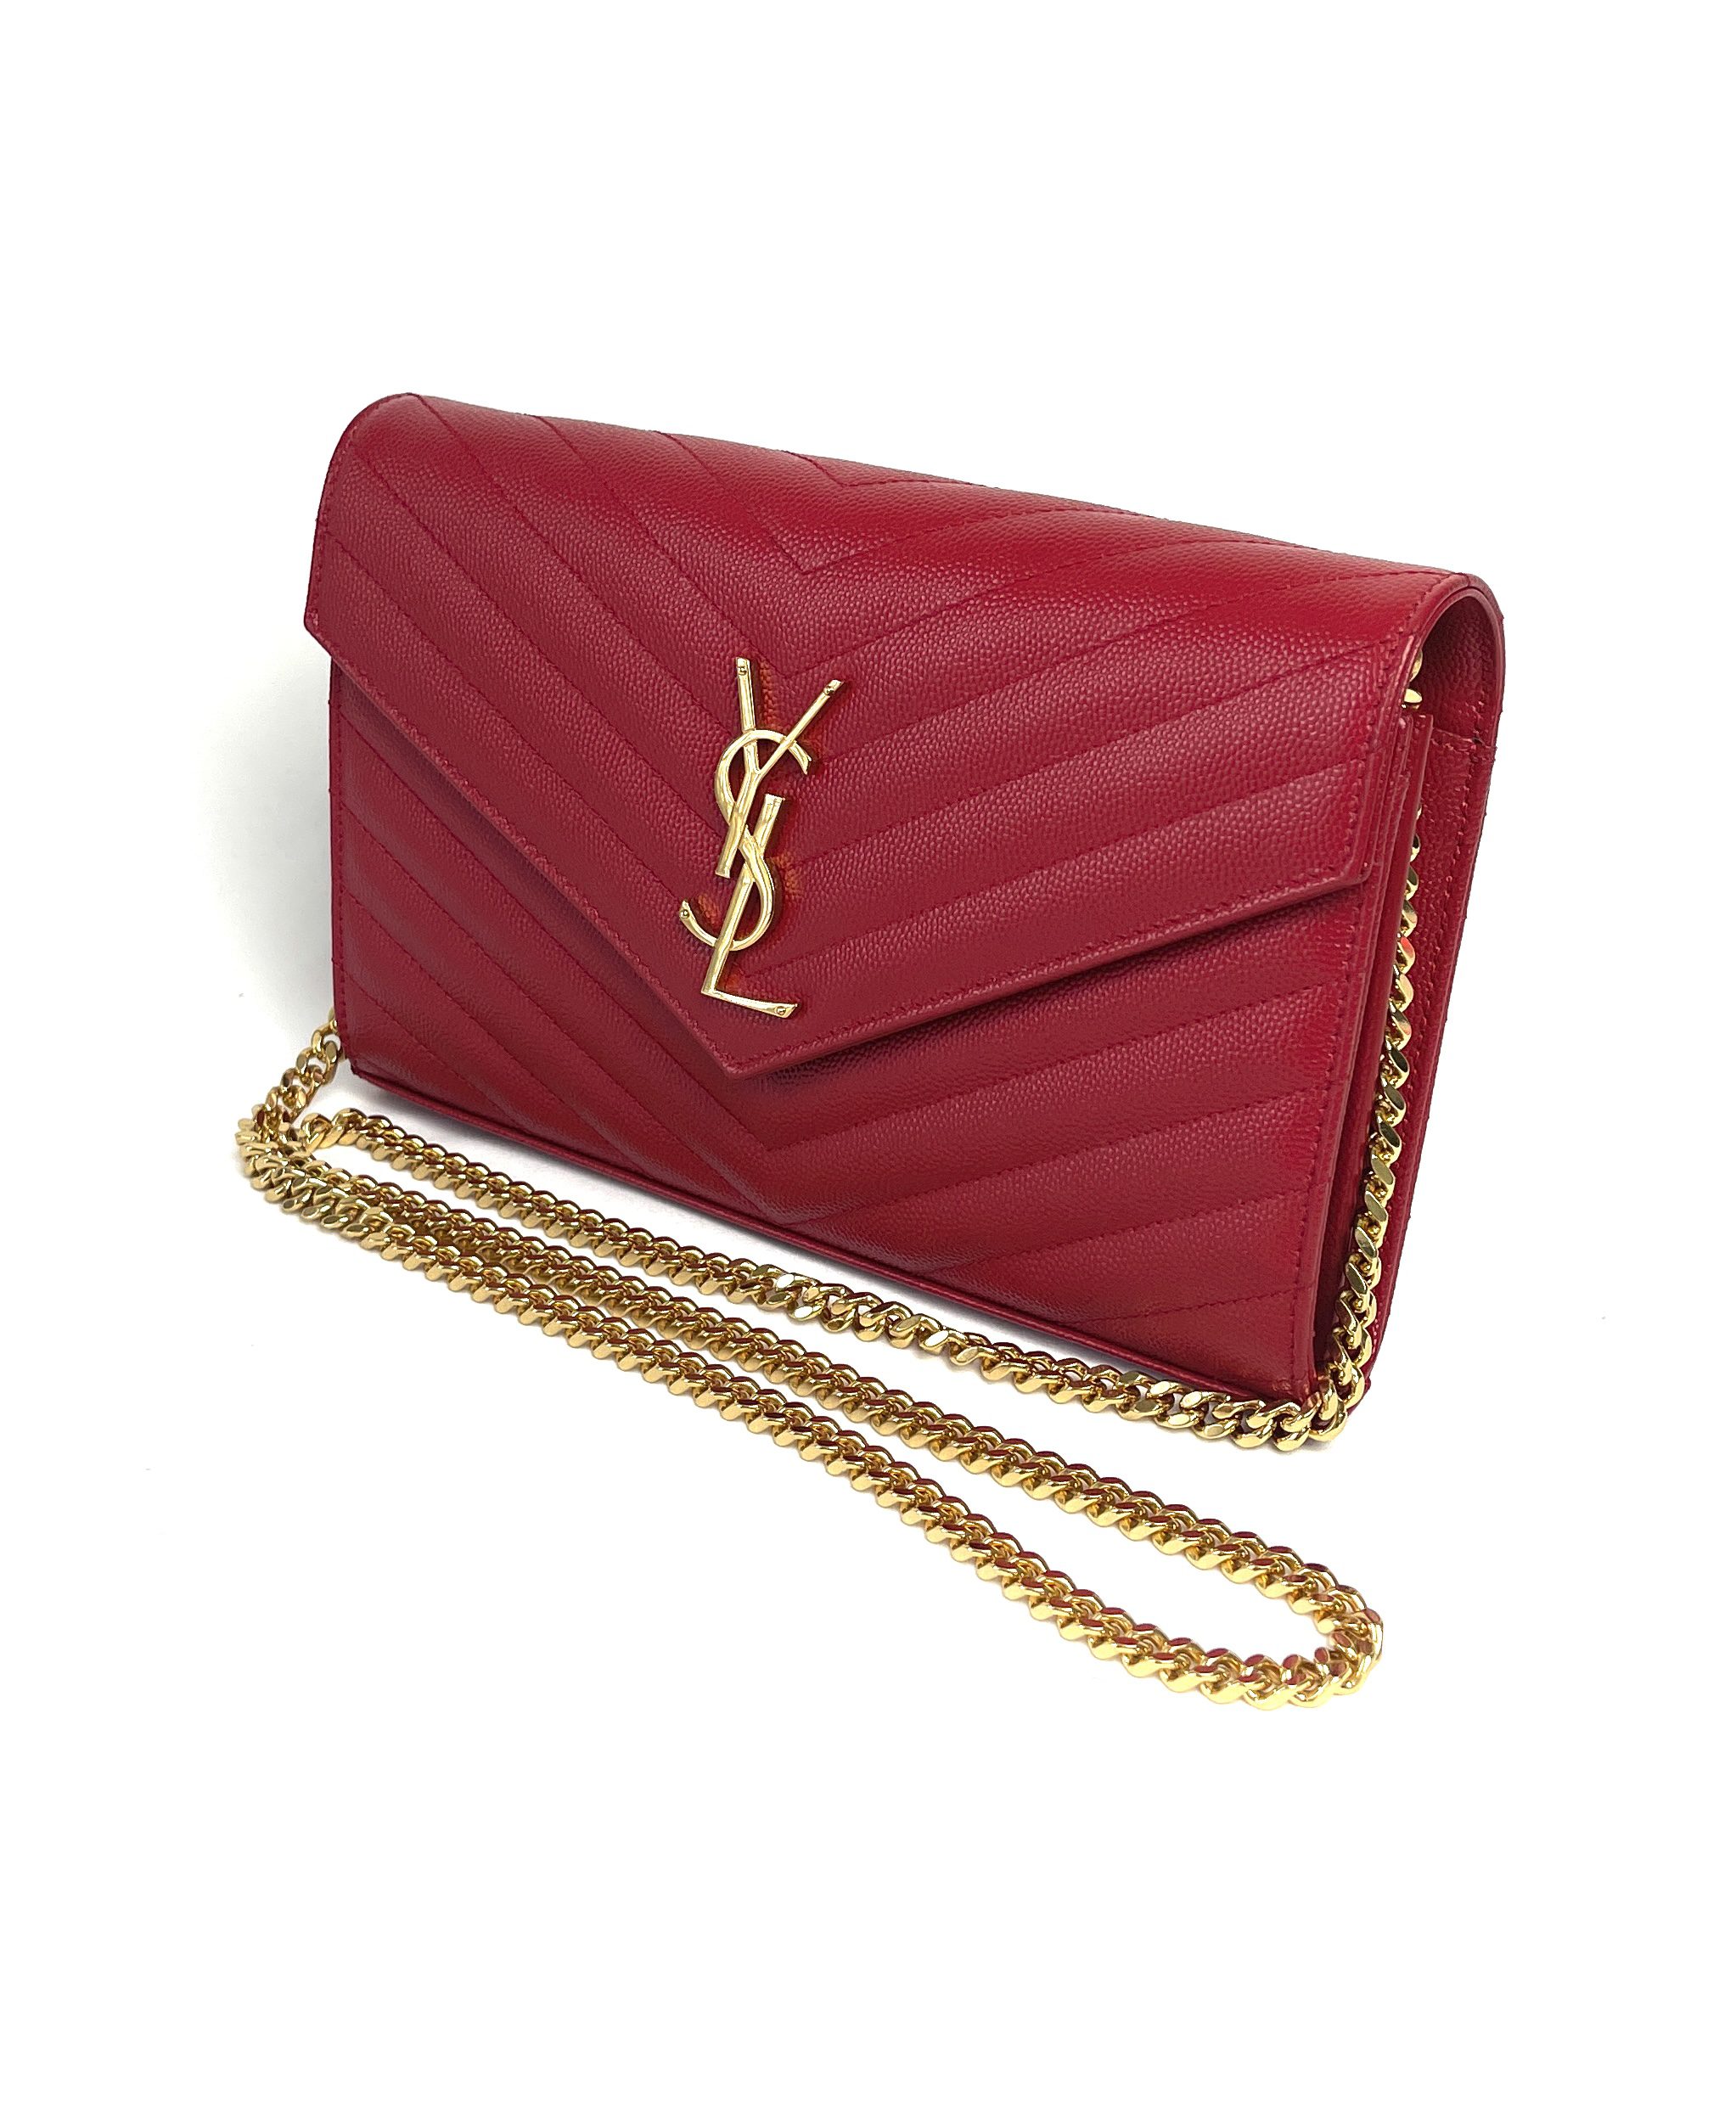 Ysl Red Grained Calfskin Envelope Wallet-On-Chain